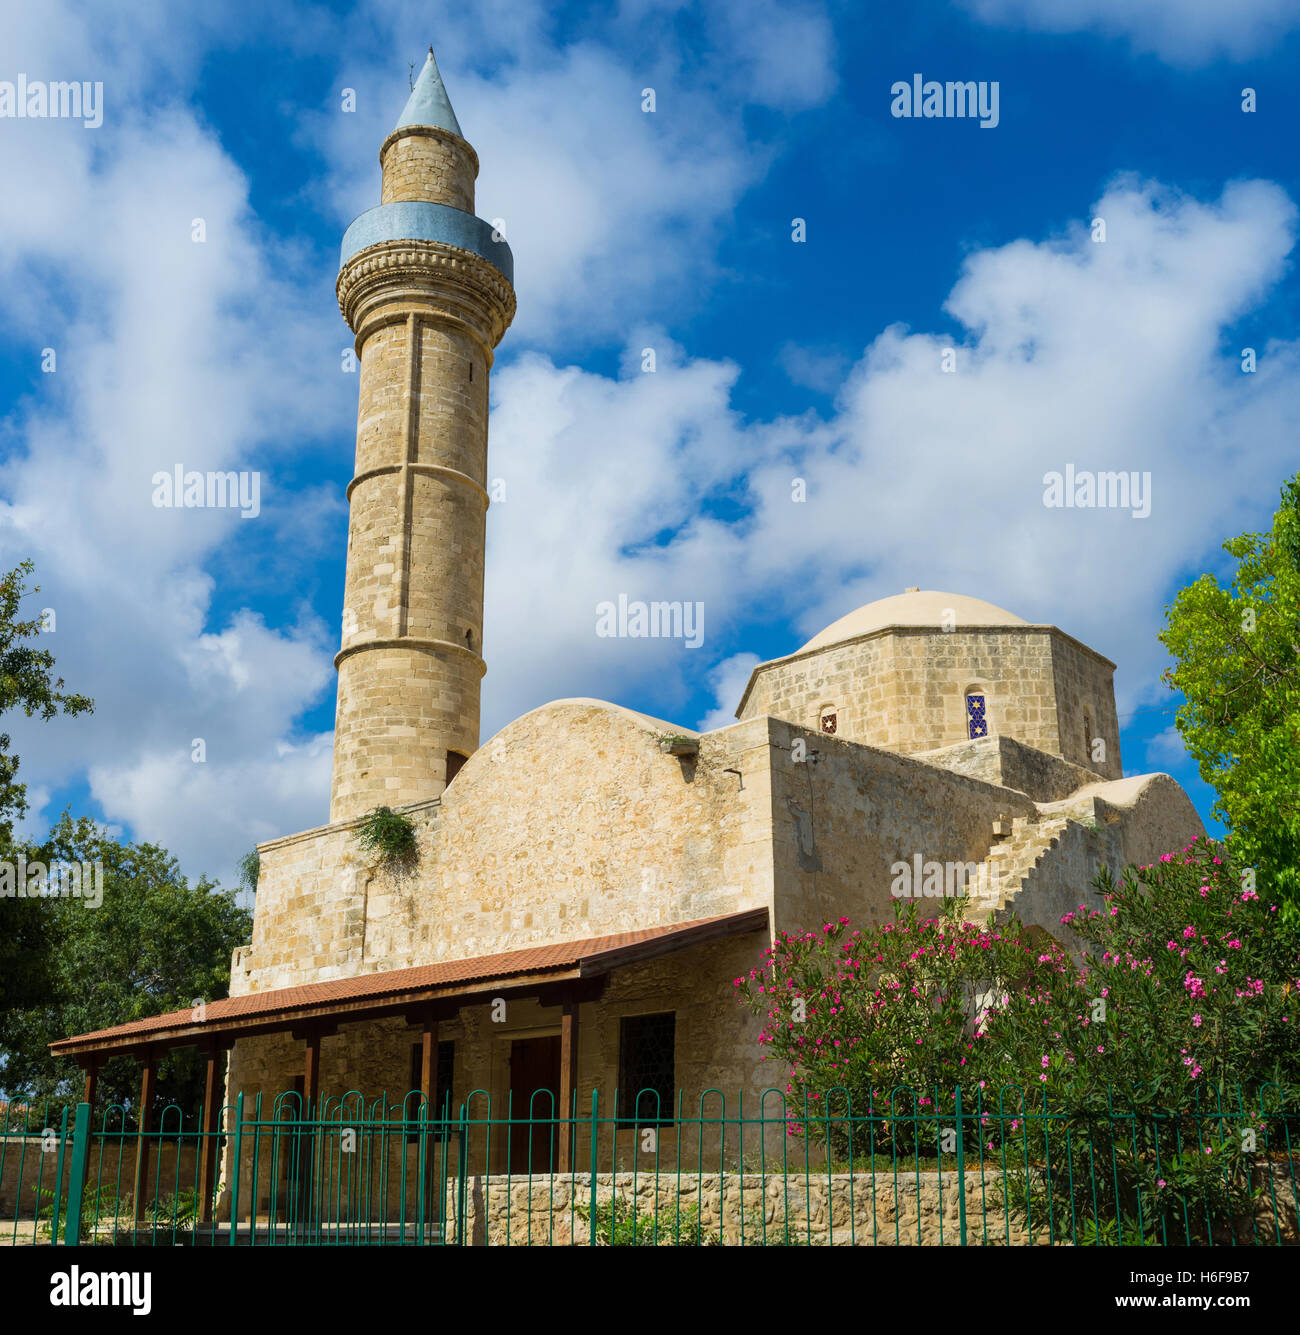 Moutallos Mosque located in the old town next to the market and surrounded by scenic garden, Paphos, Cyprus. Stock Photo